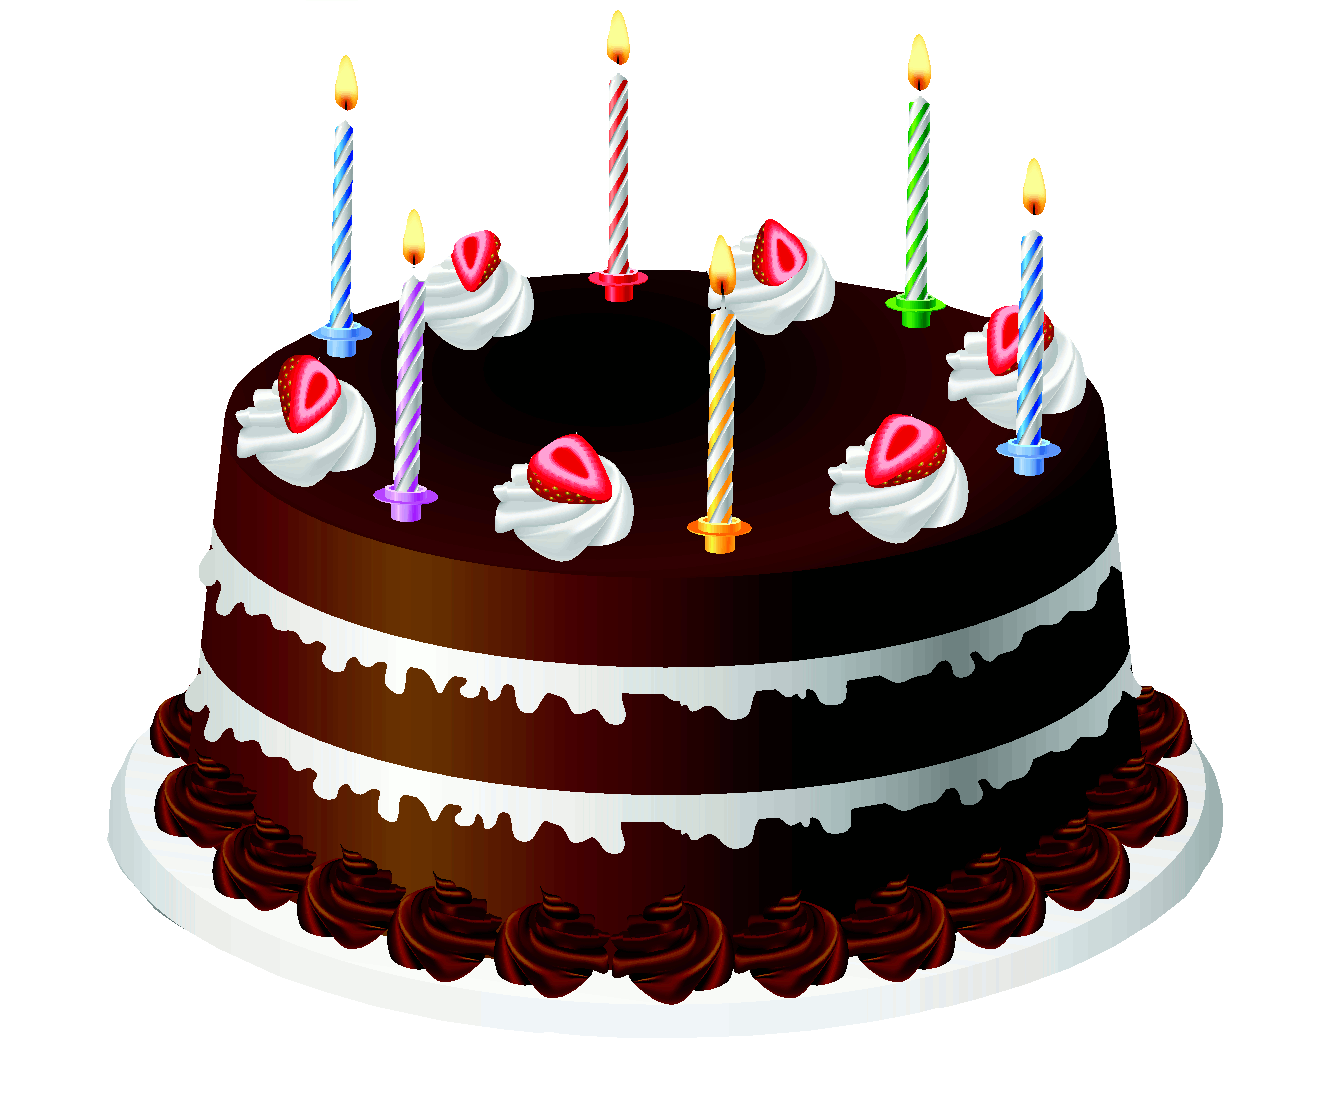 Birthday Cake Png - Cake Png Image #26292, Transparent background PNG HD thumbnail